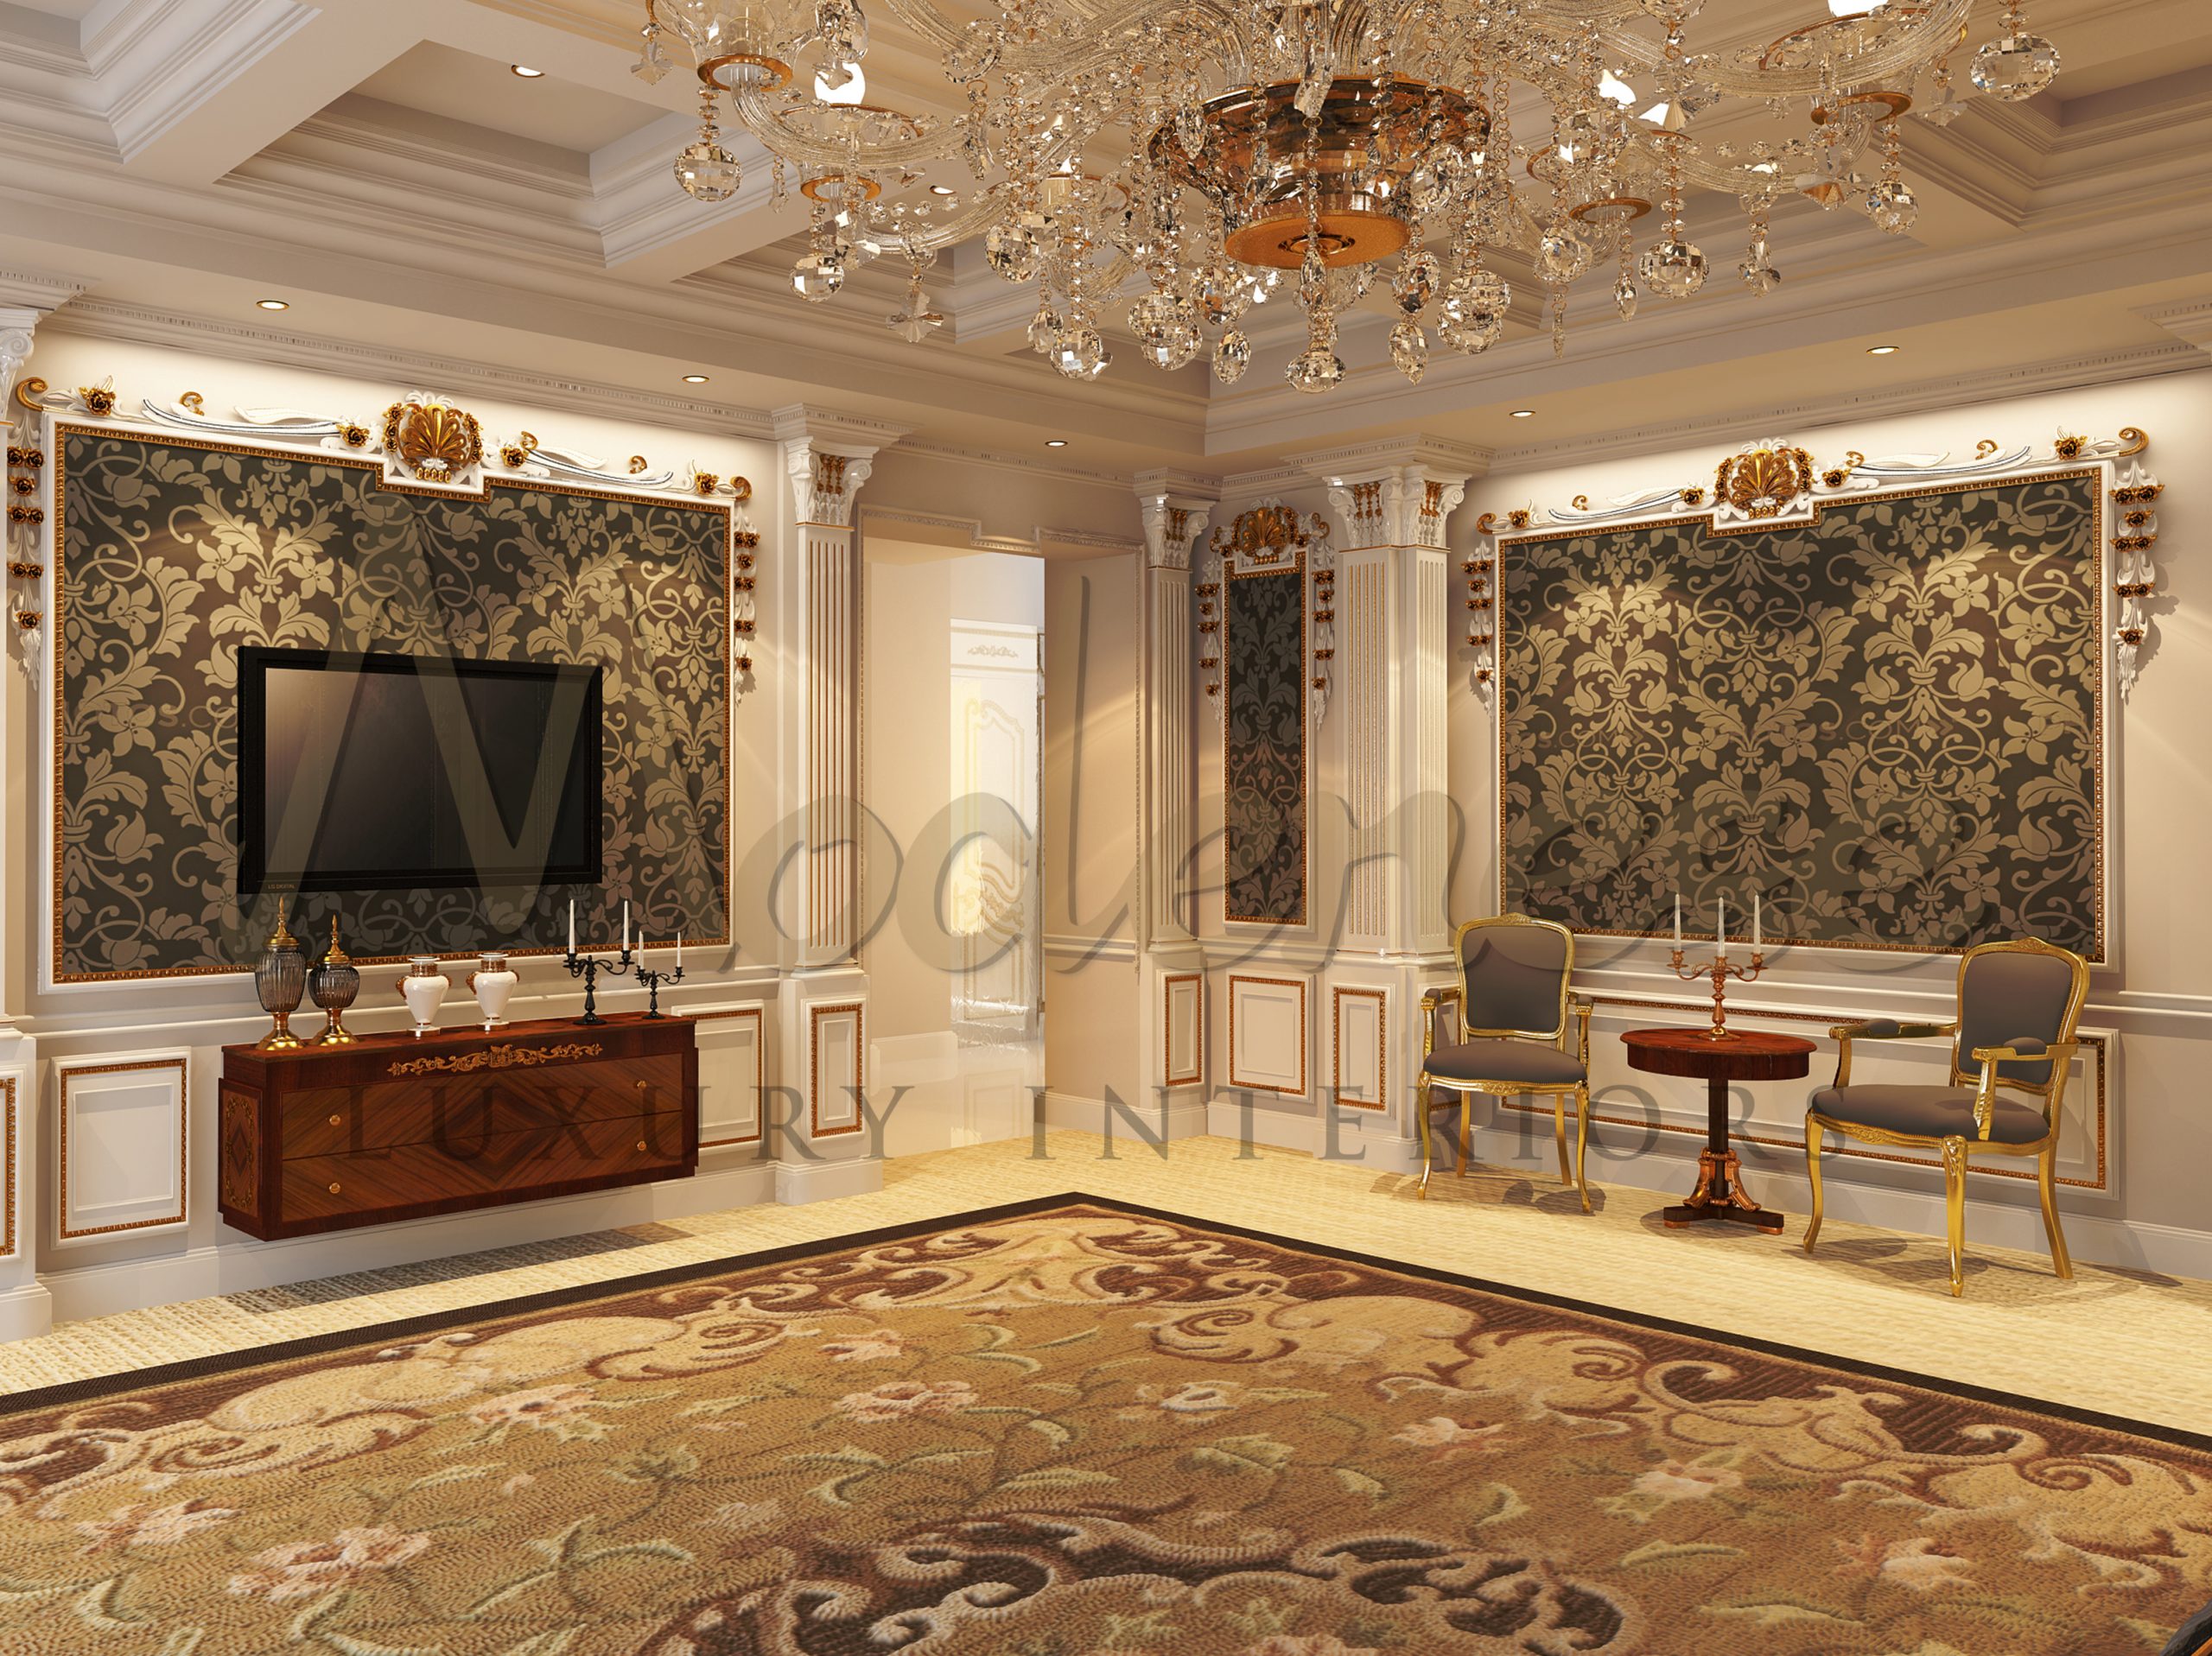 Luxury royal bedrooms for project in London - United Kingdom